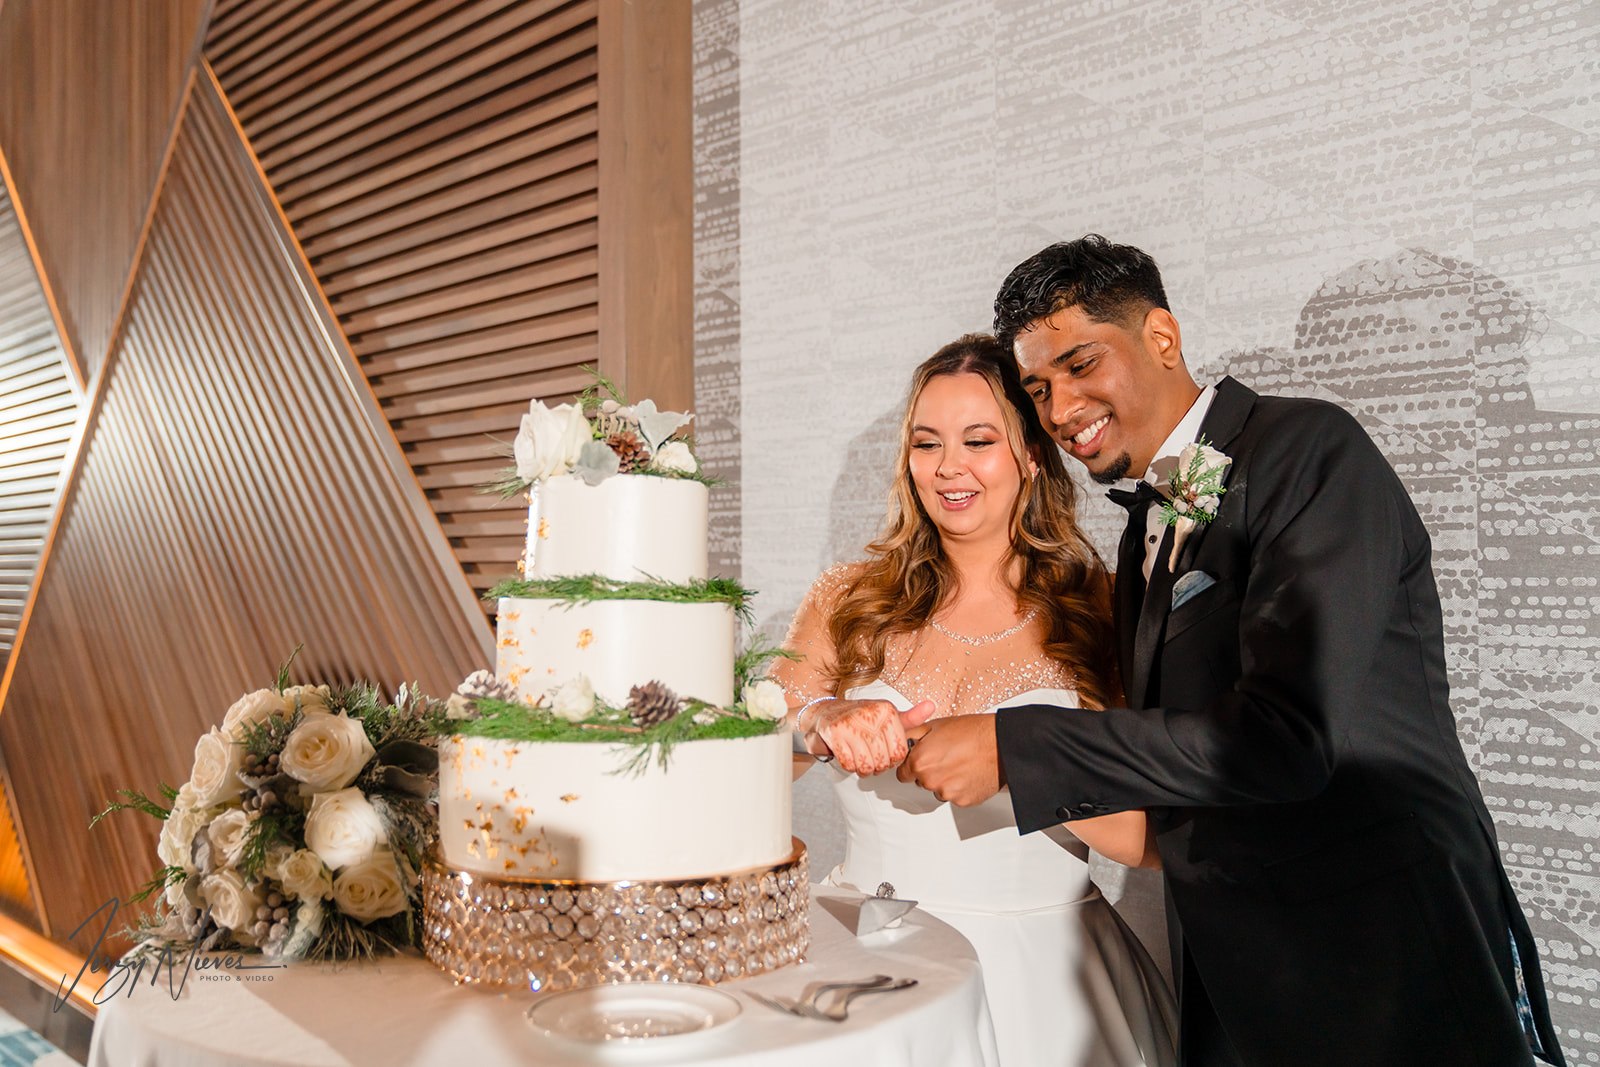 Ravin and Nicole cutting the cake at Disney Swan Reception Hall.